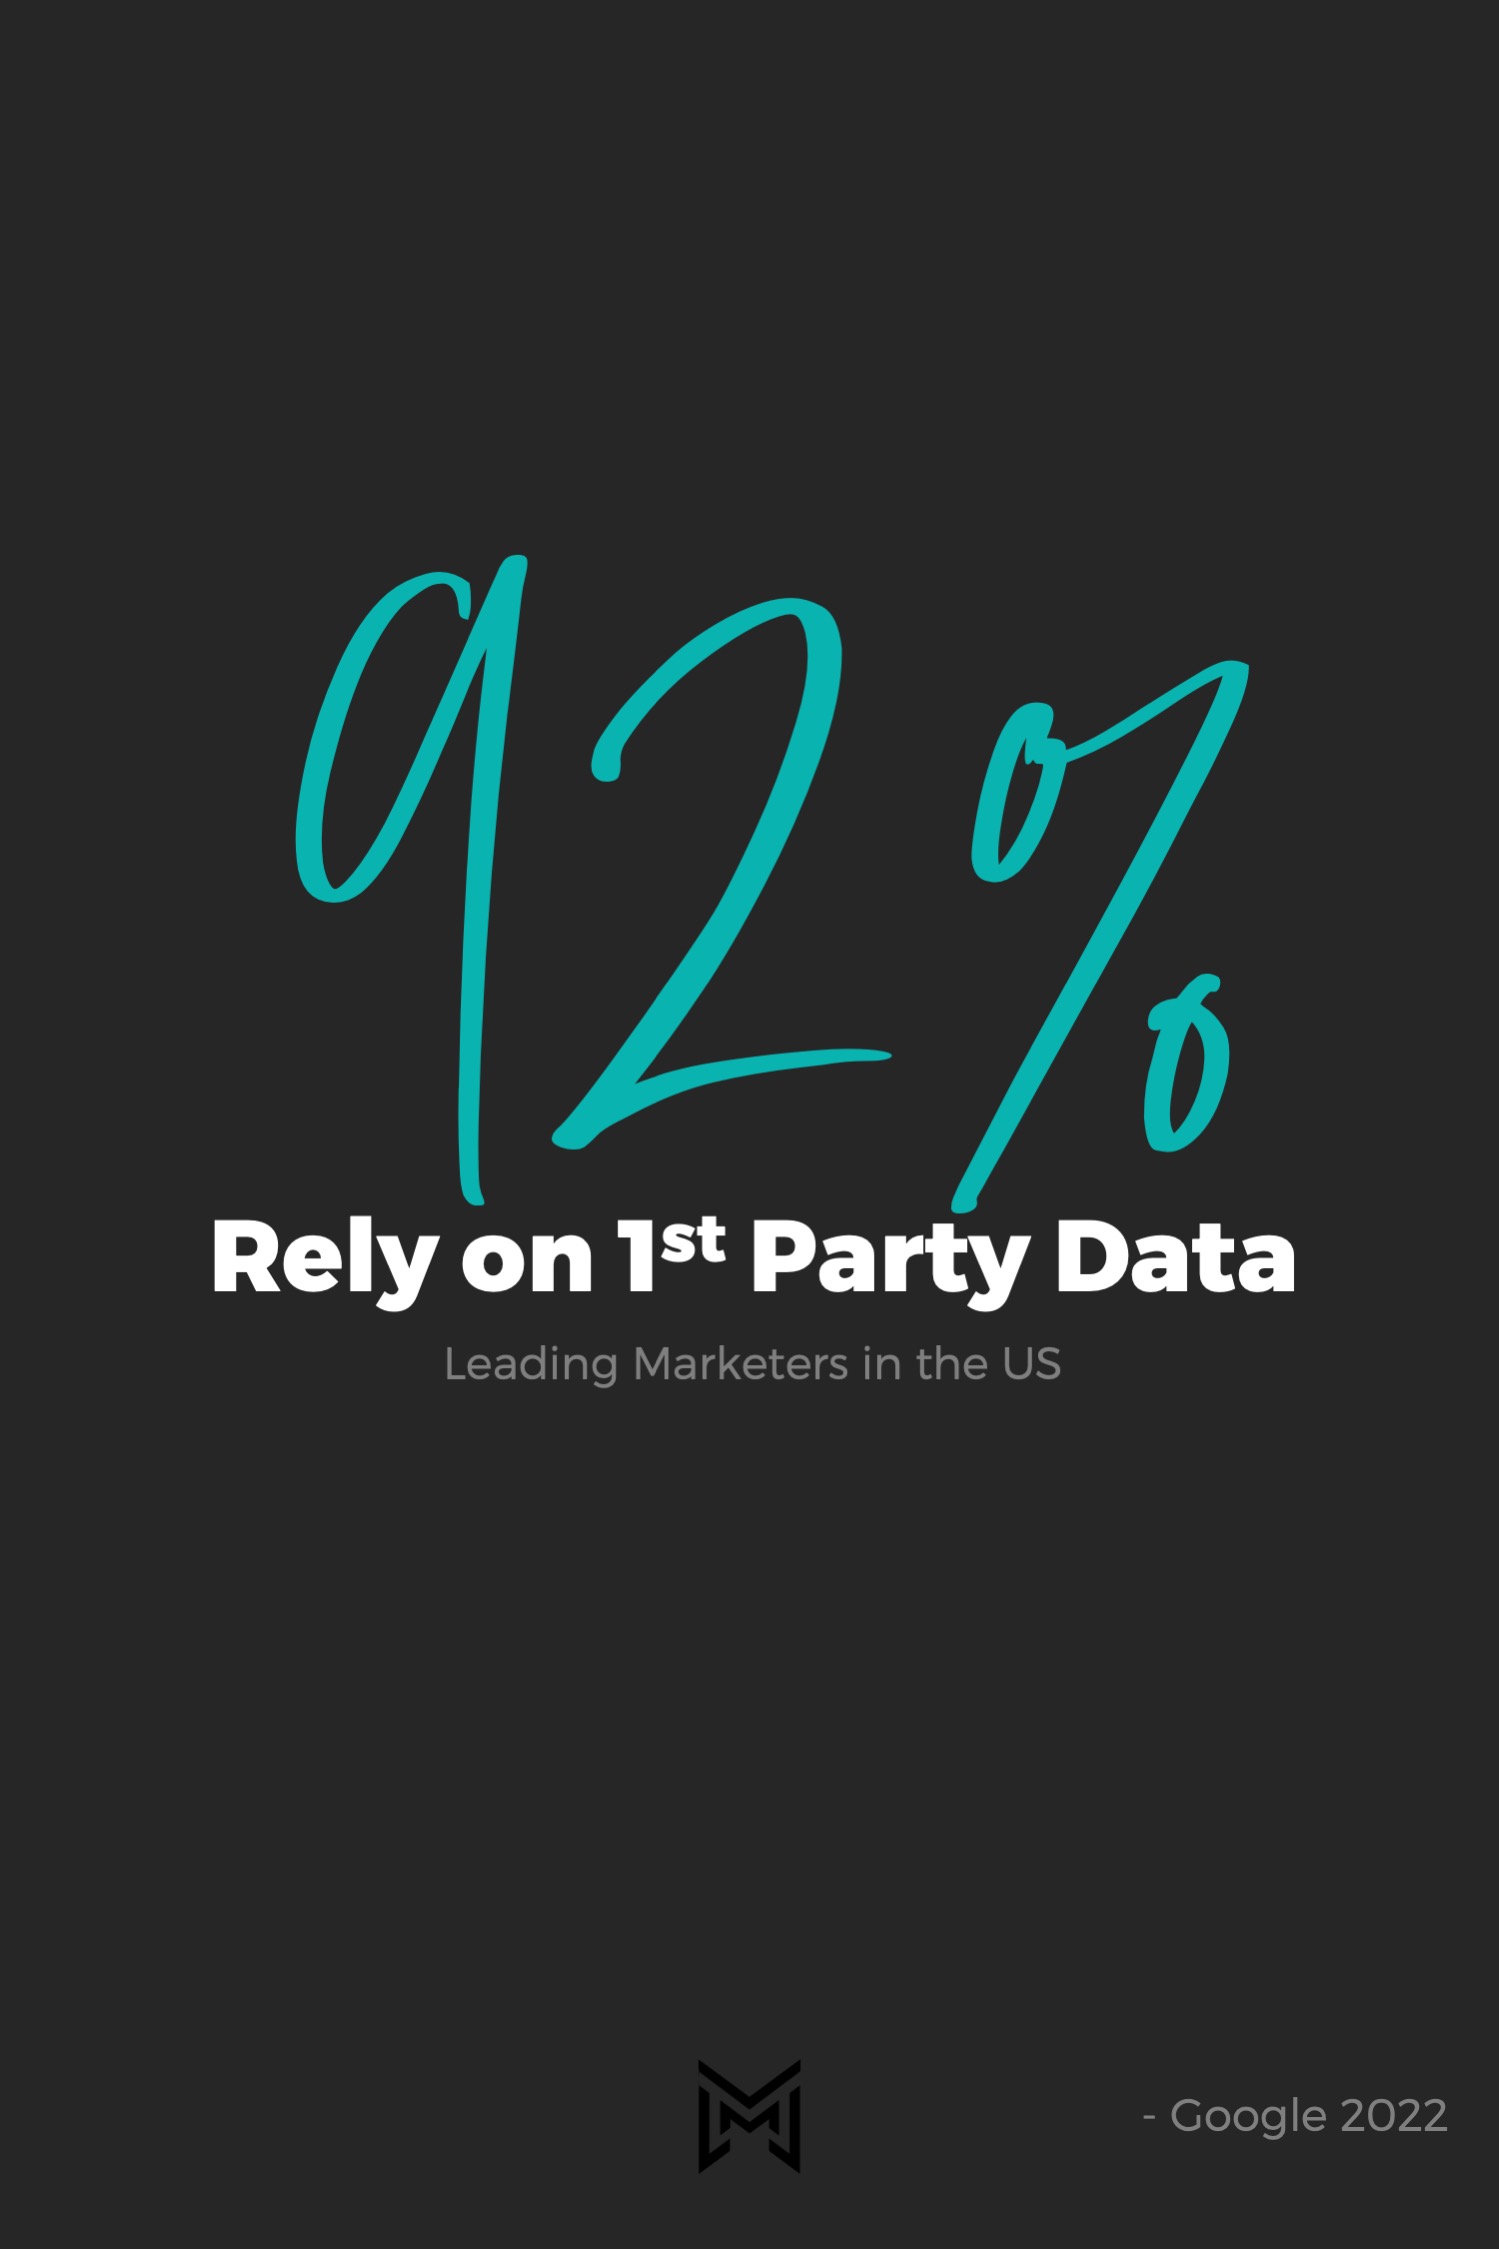 Marketing Stats - 92% Rely on First Data